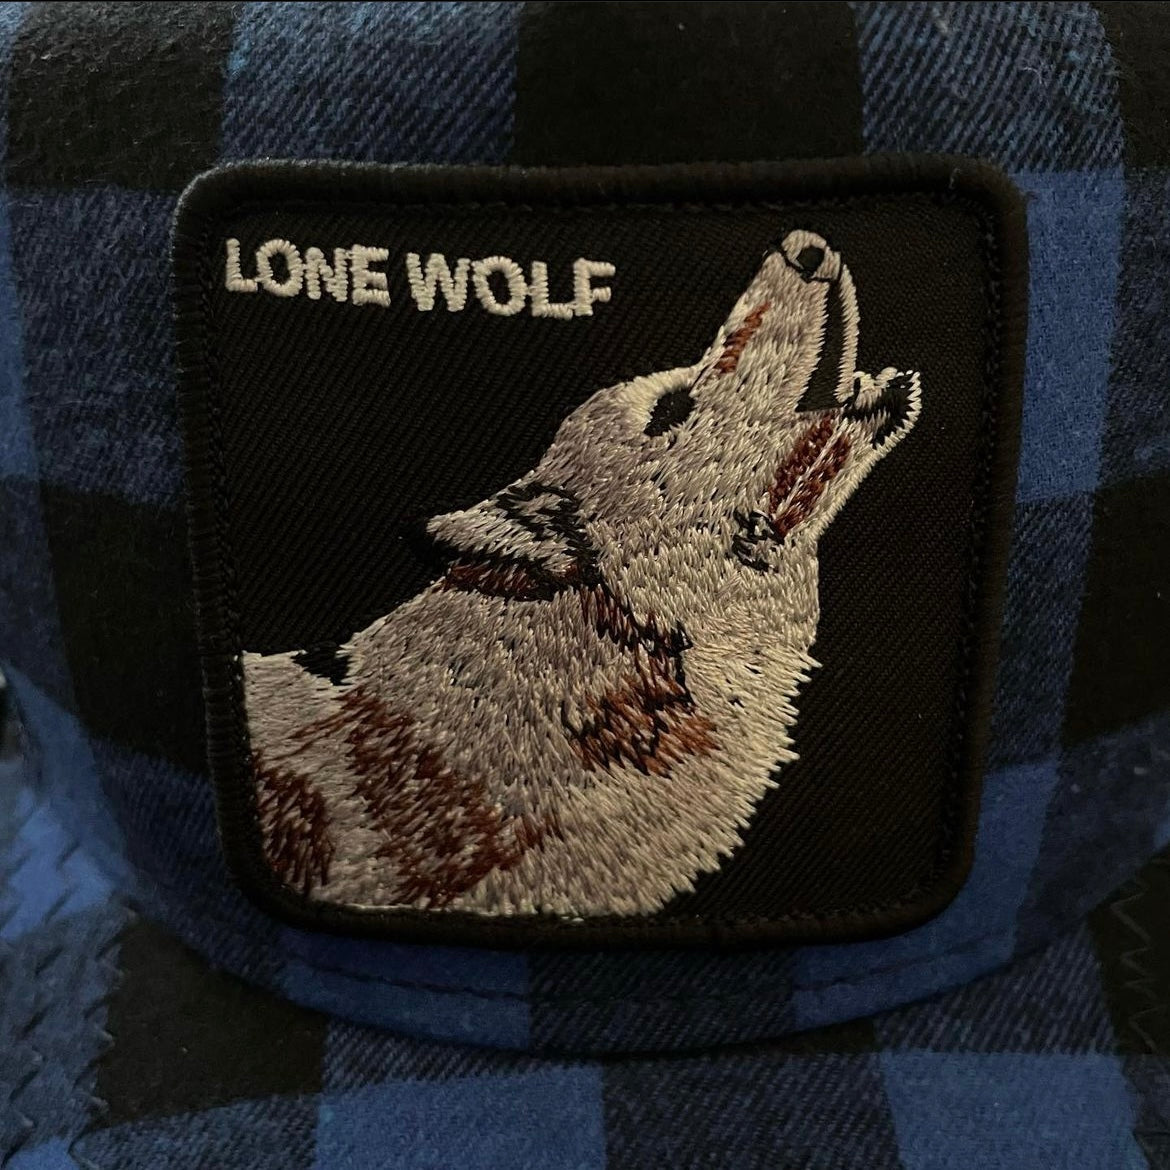 THE LONE WOLF